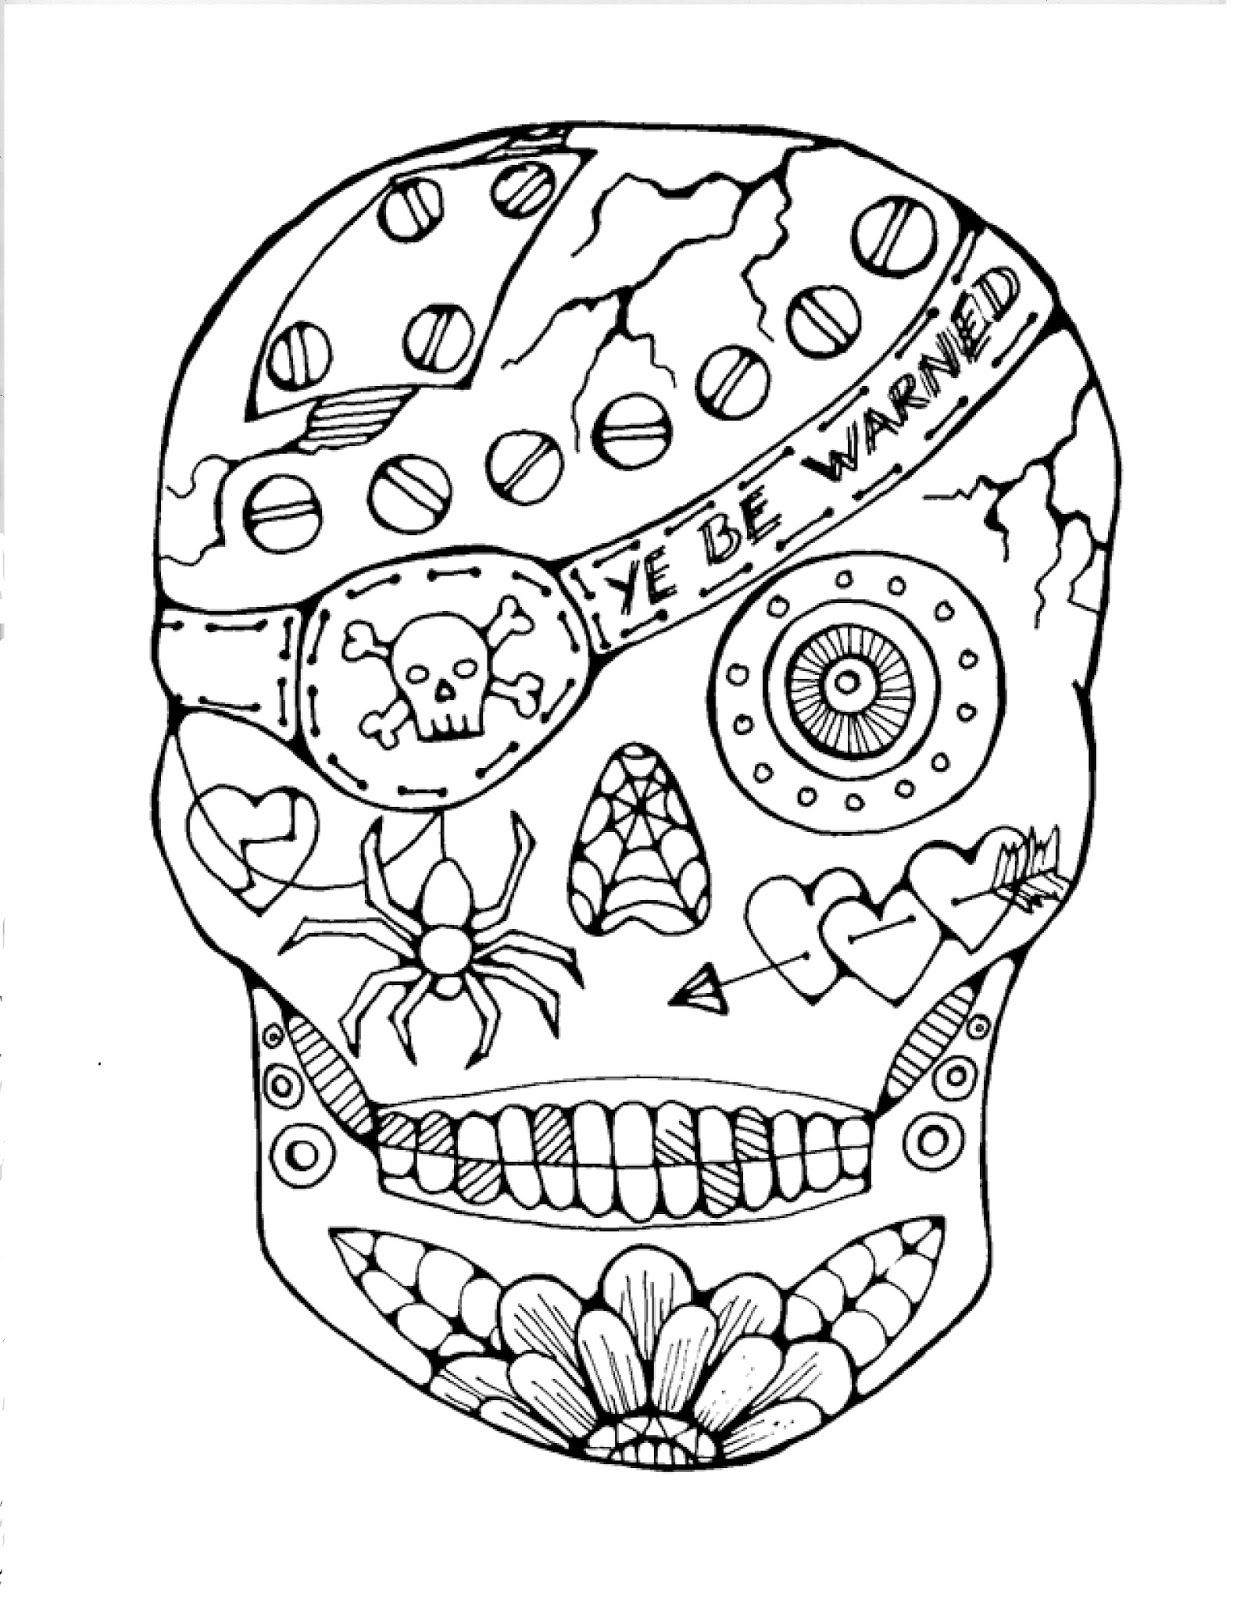 Sugar Skull Coloring Pages Best Coloring Pages For Kids